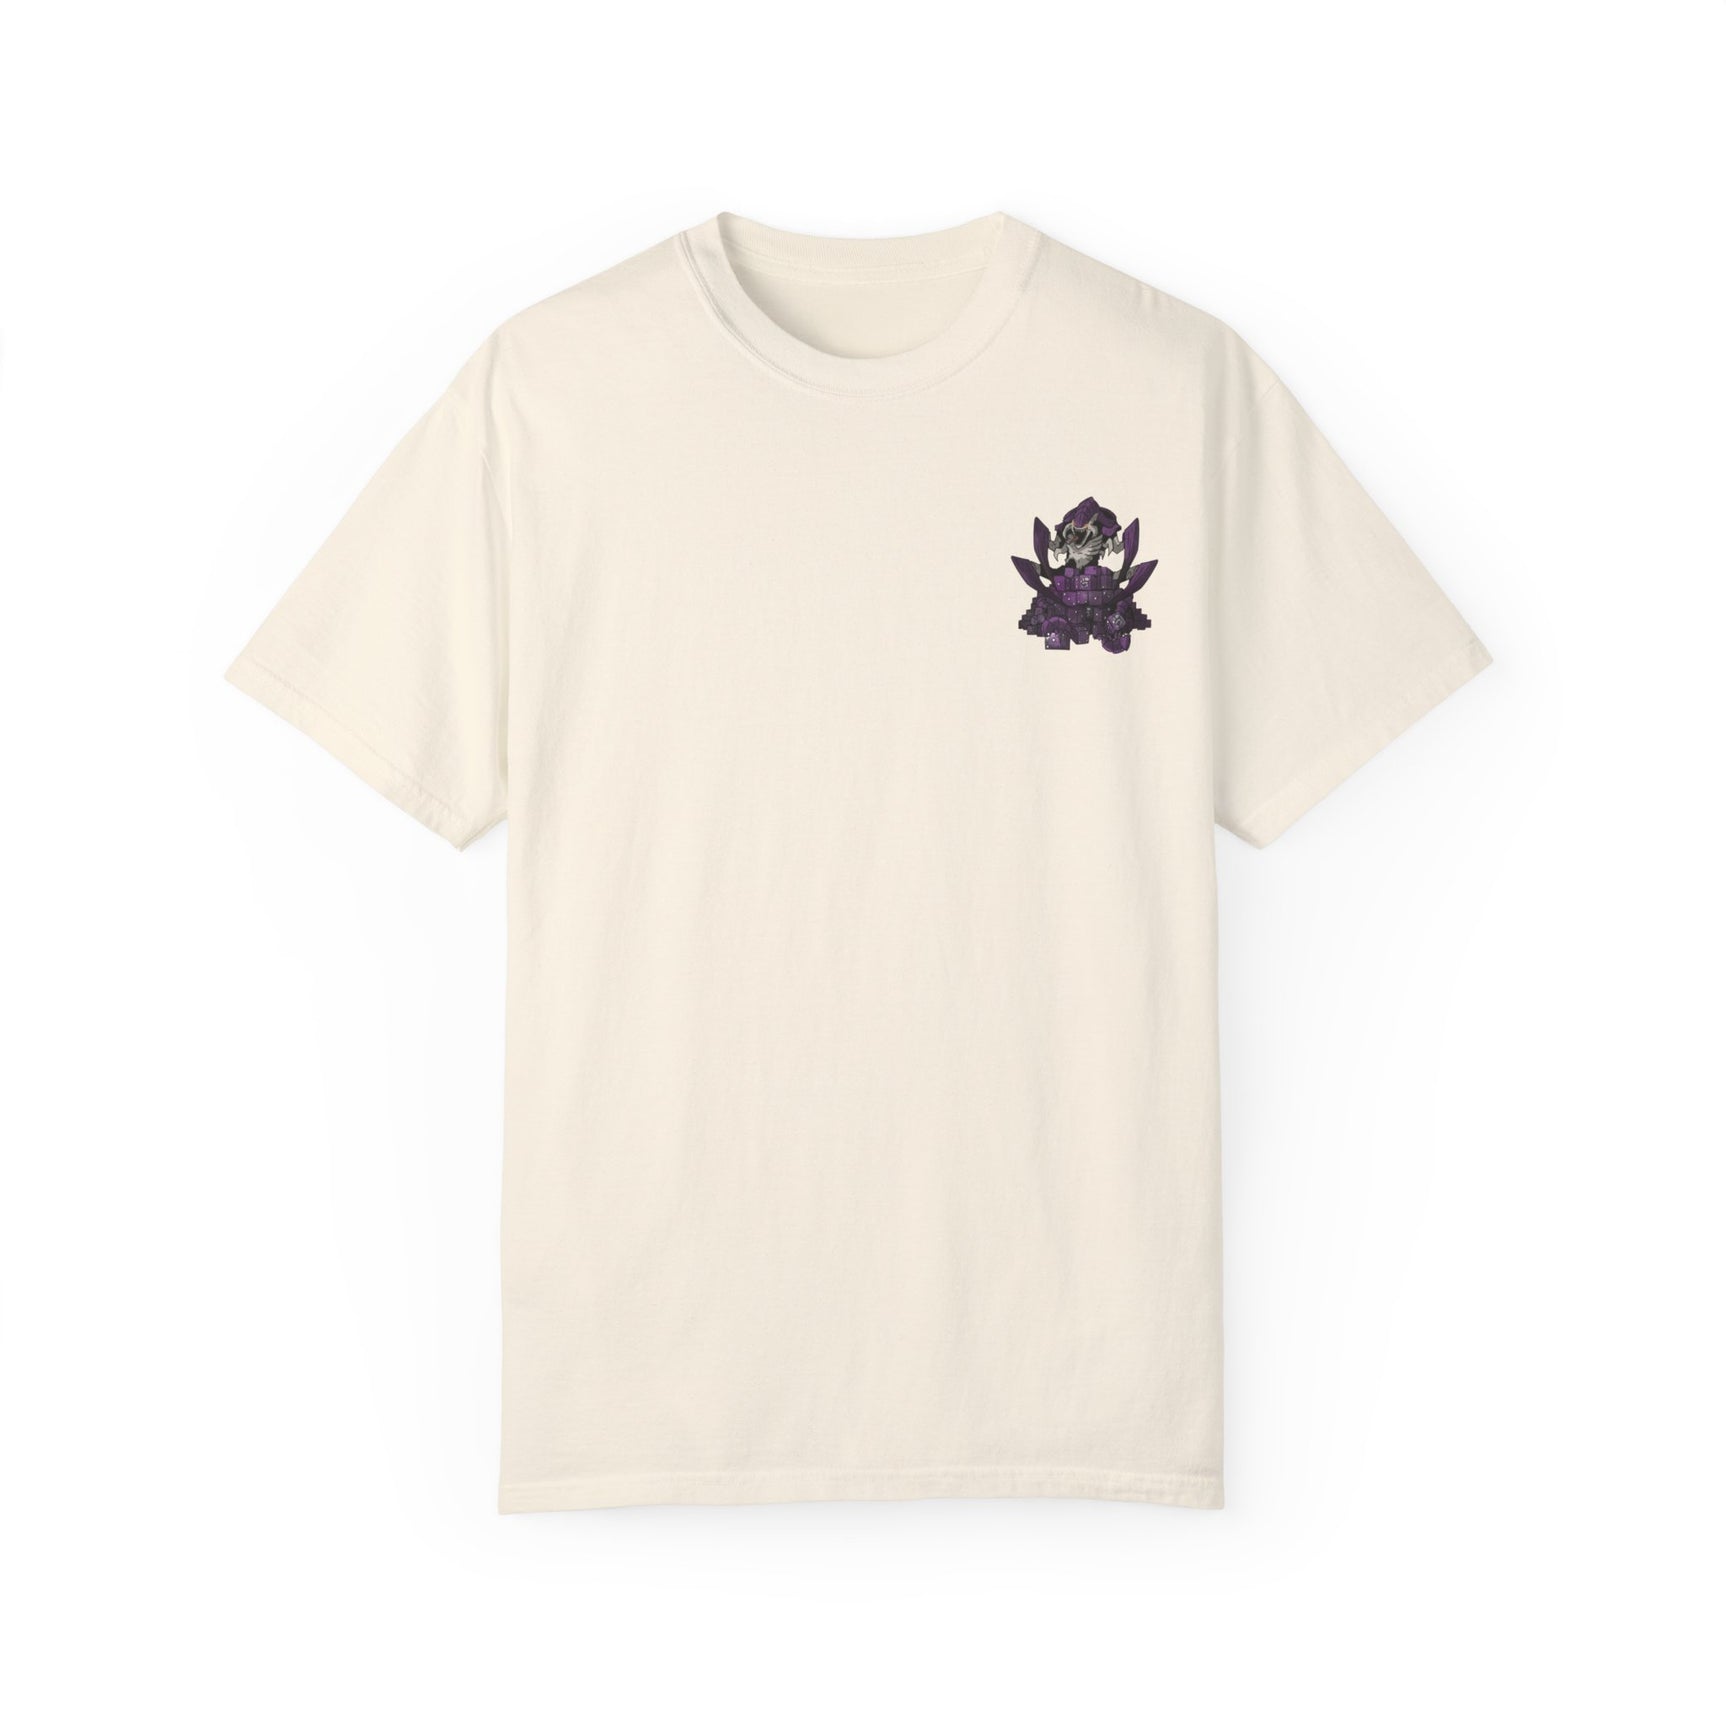 Space Bugs - For the Hive! T-shirt